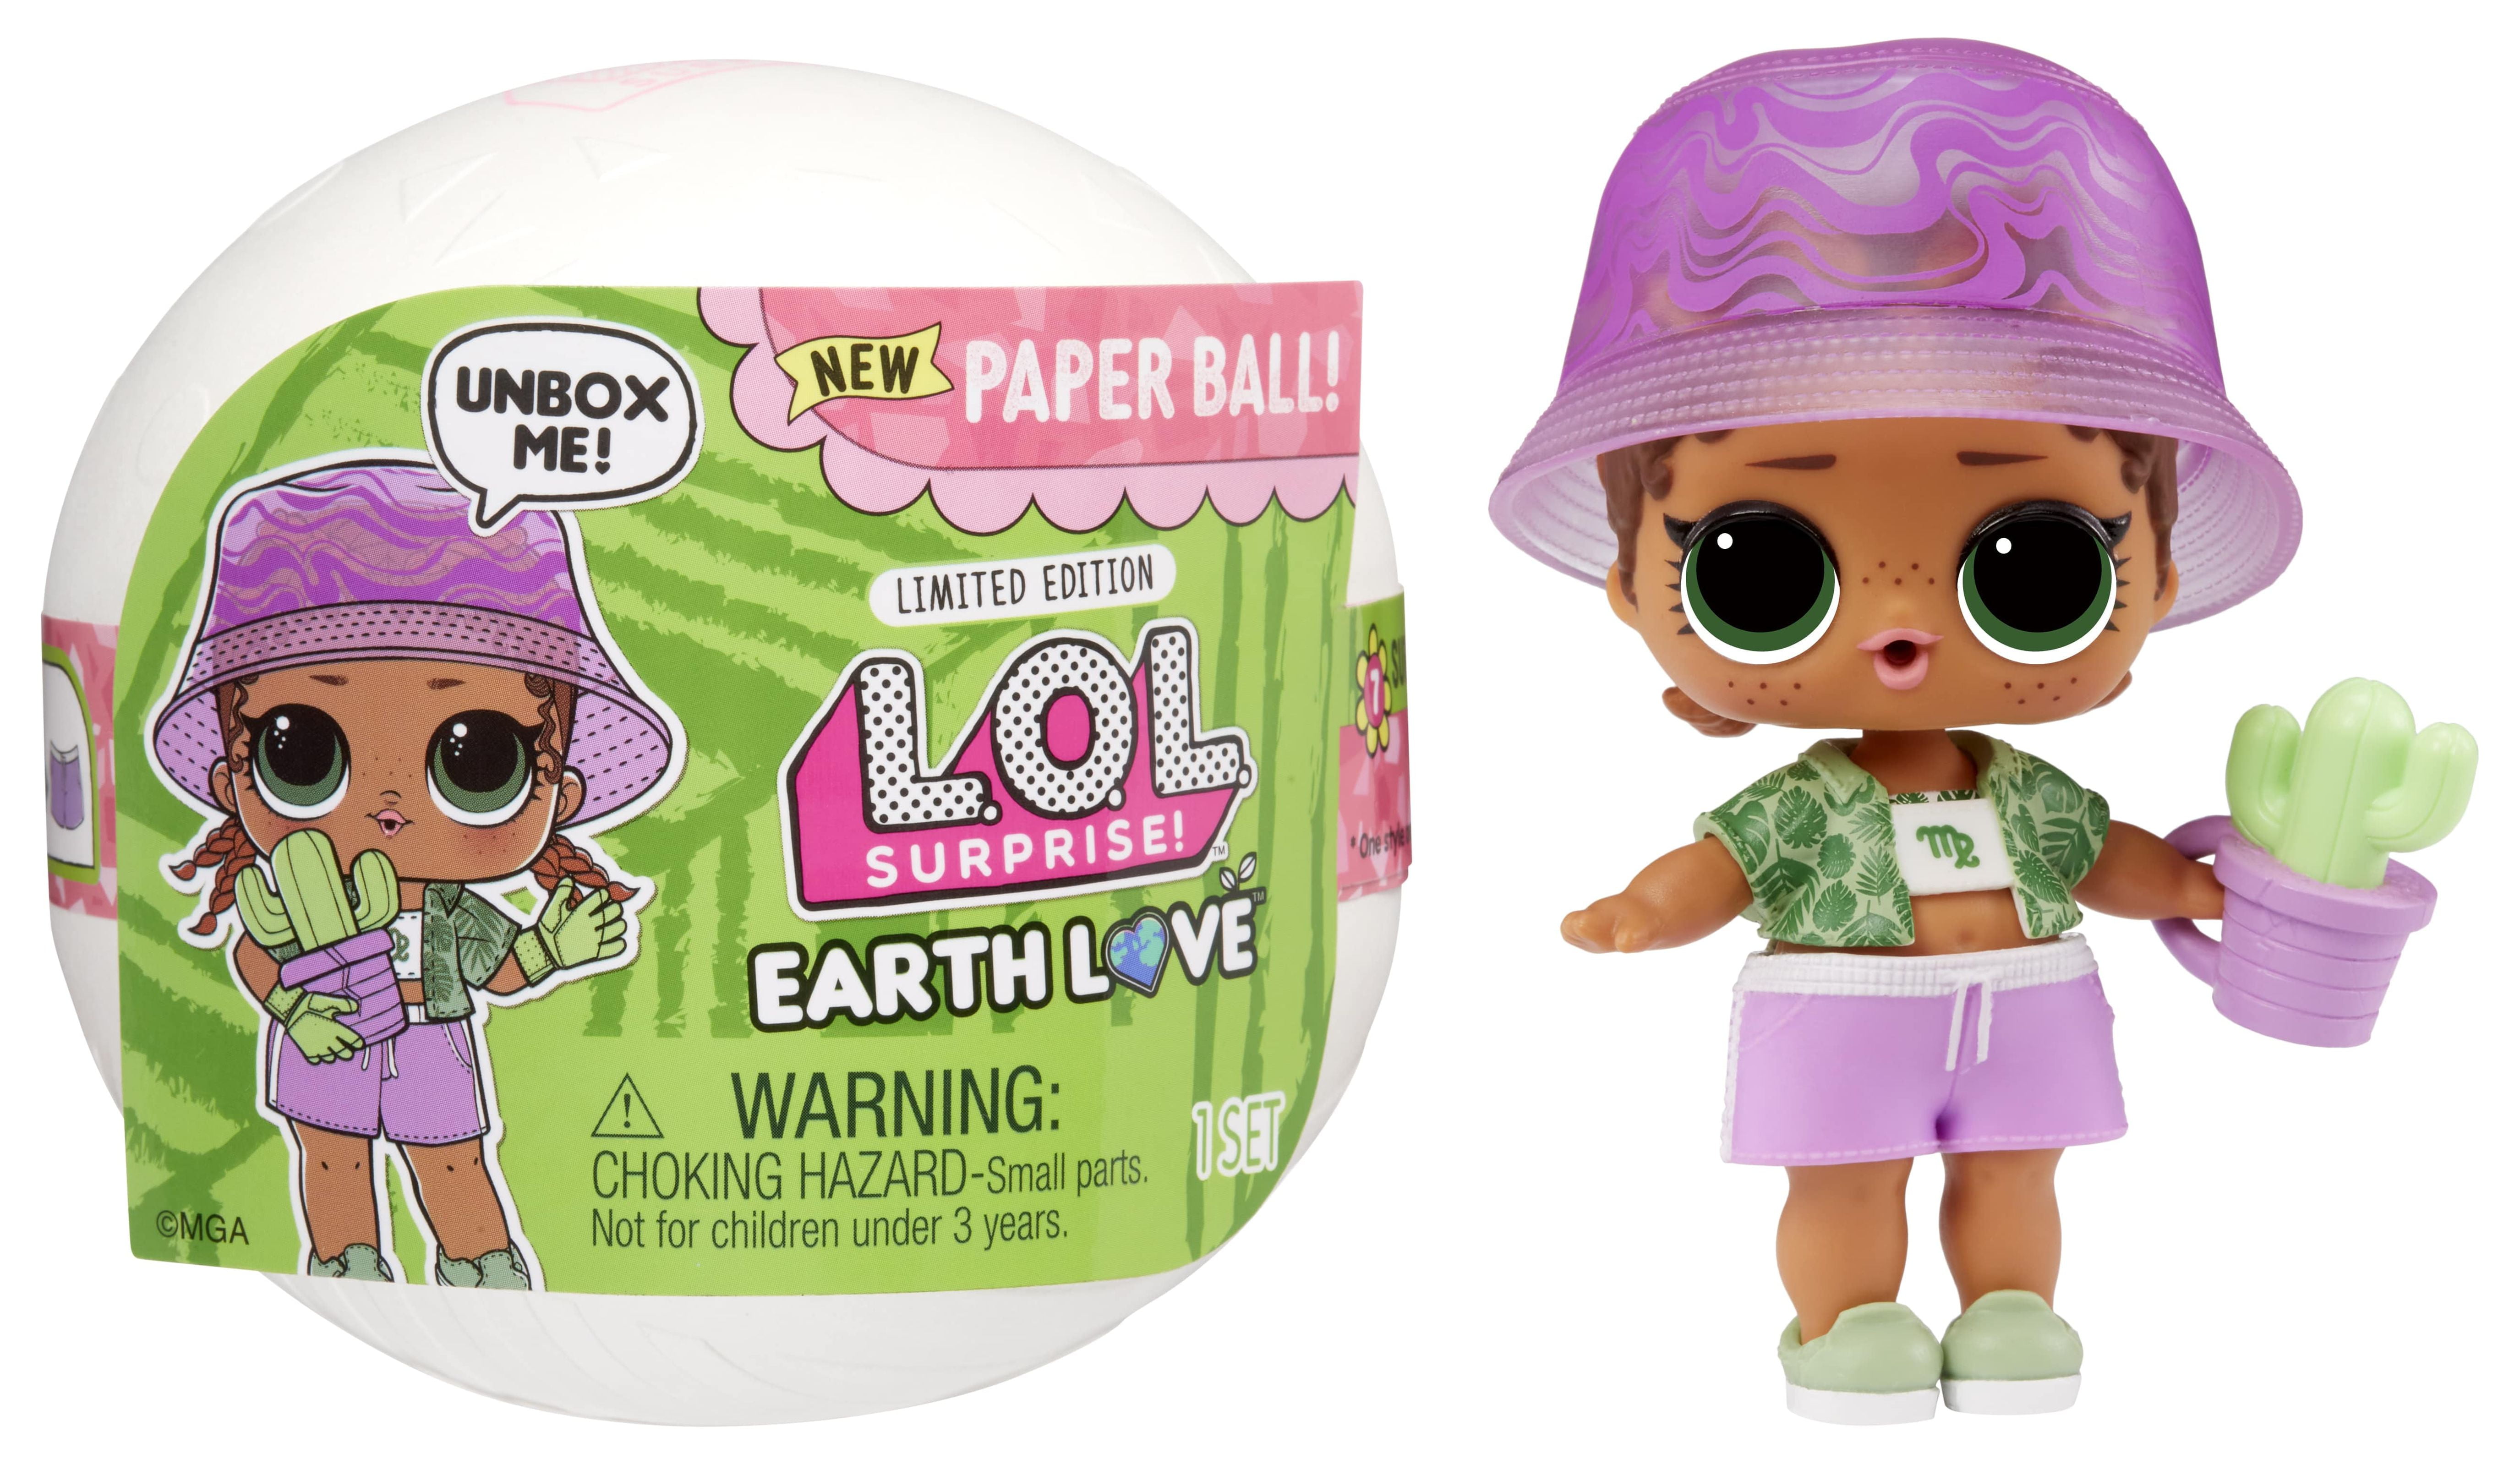 LOL Surprise Earth Love Earthy BB Doll with 7 Surprises, Earth Day Doll,  Accessories, Limited Edition Doll, Collectible Doll, Paper Packaging